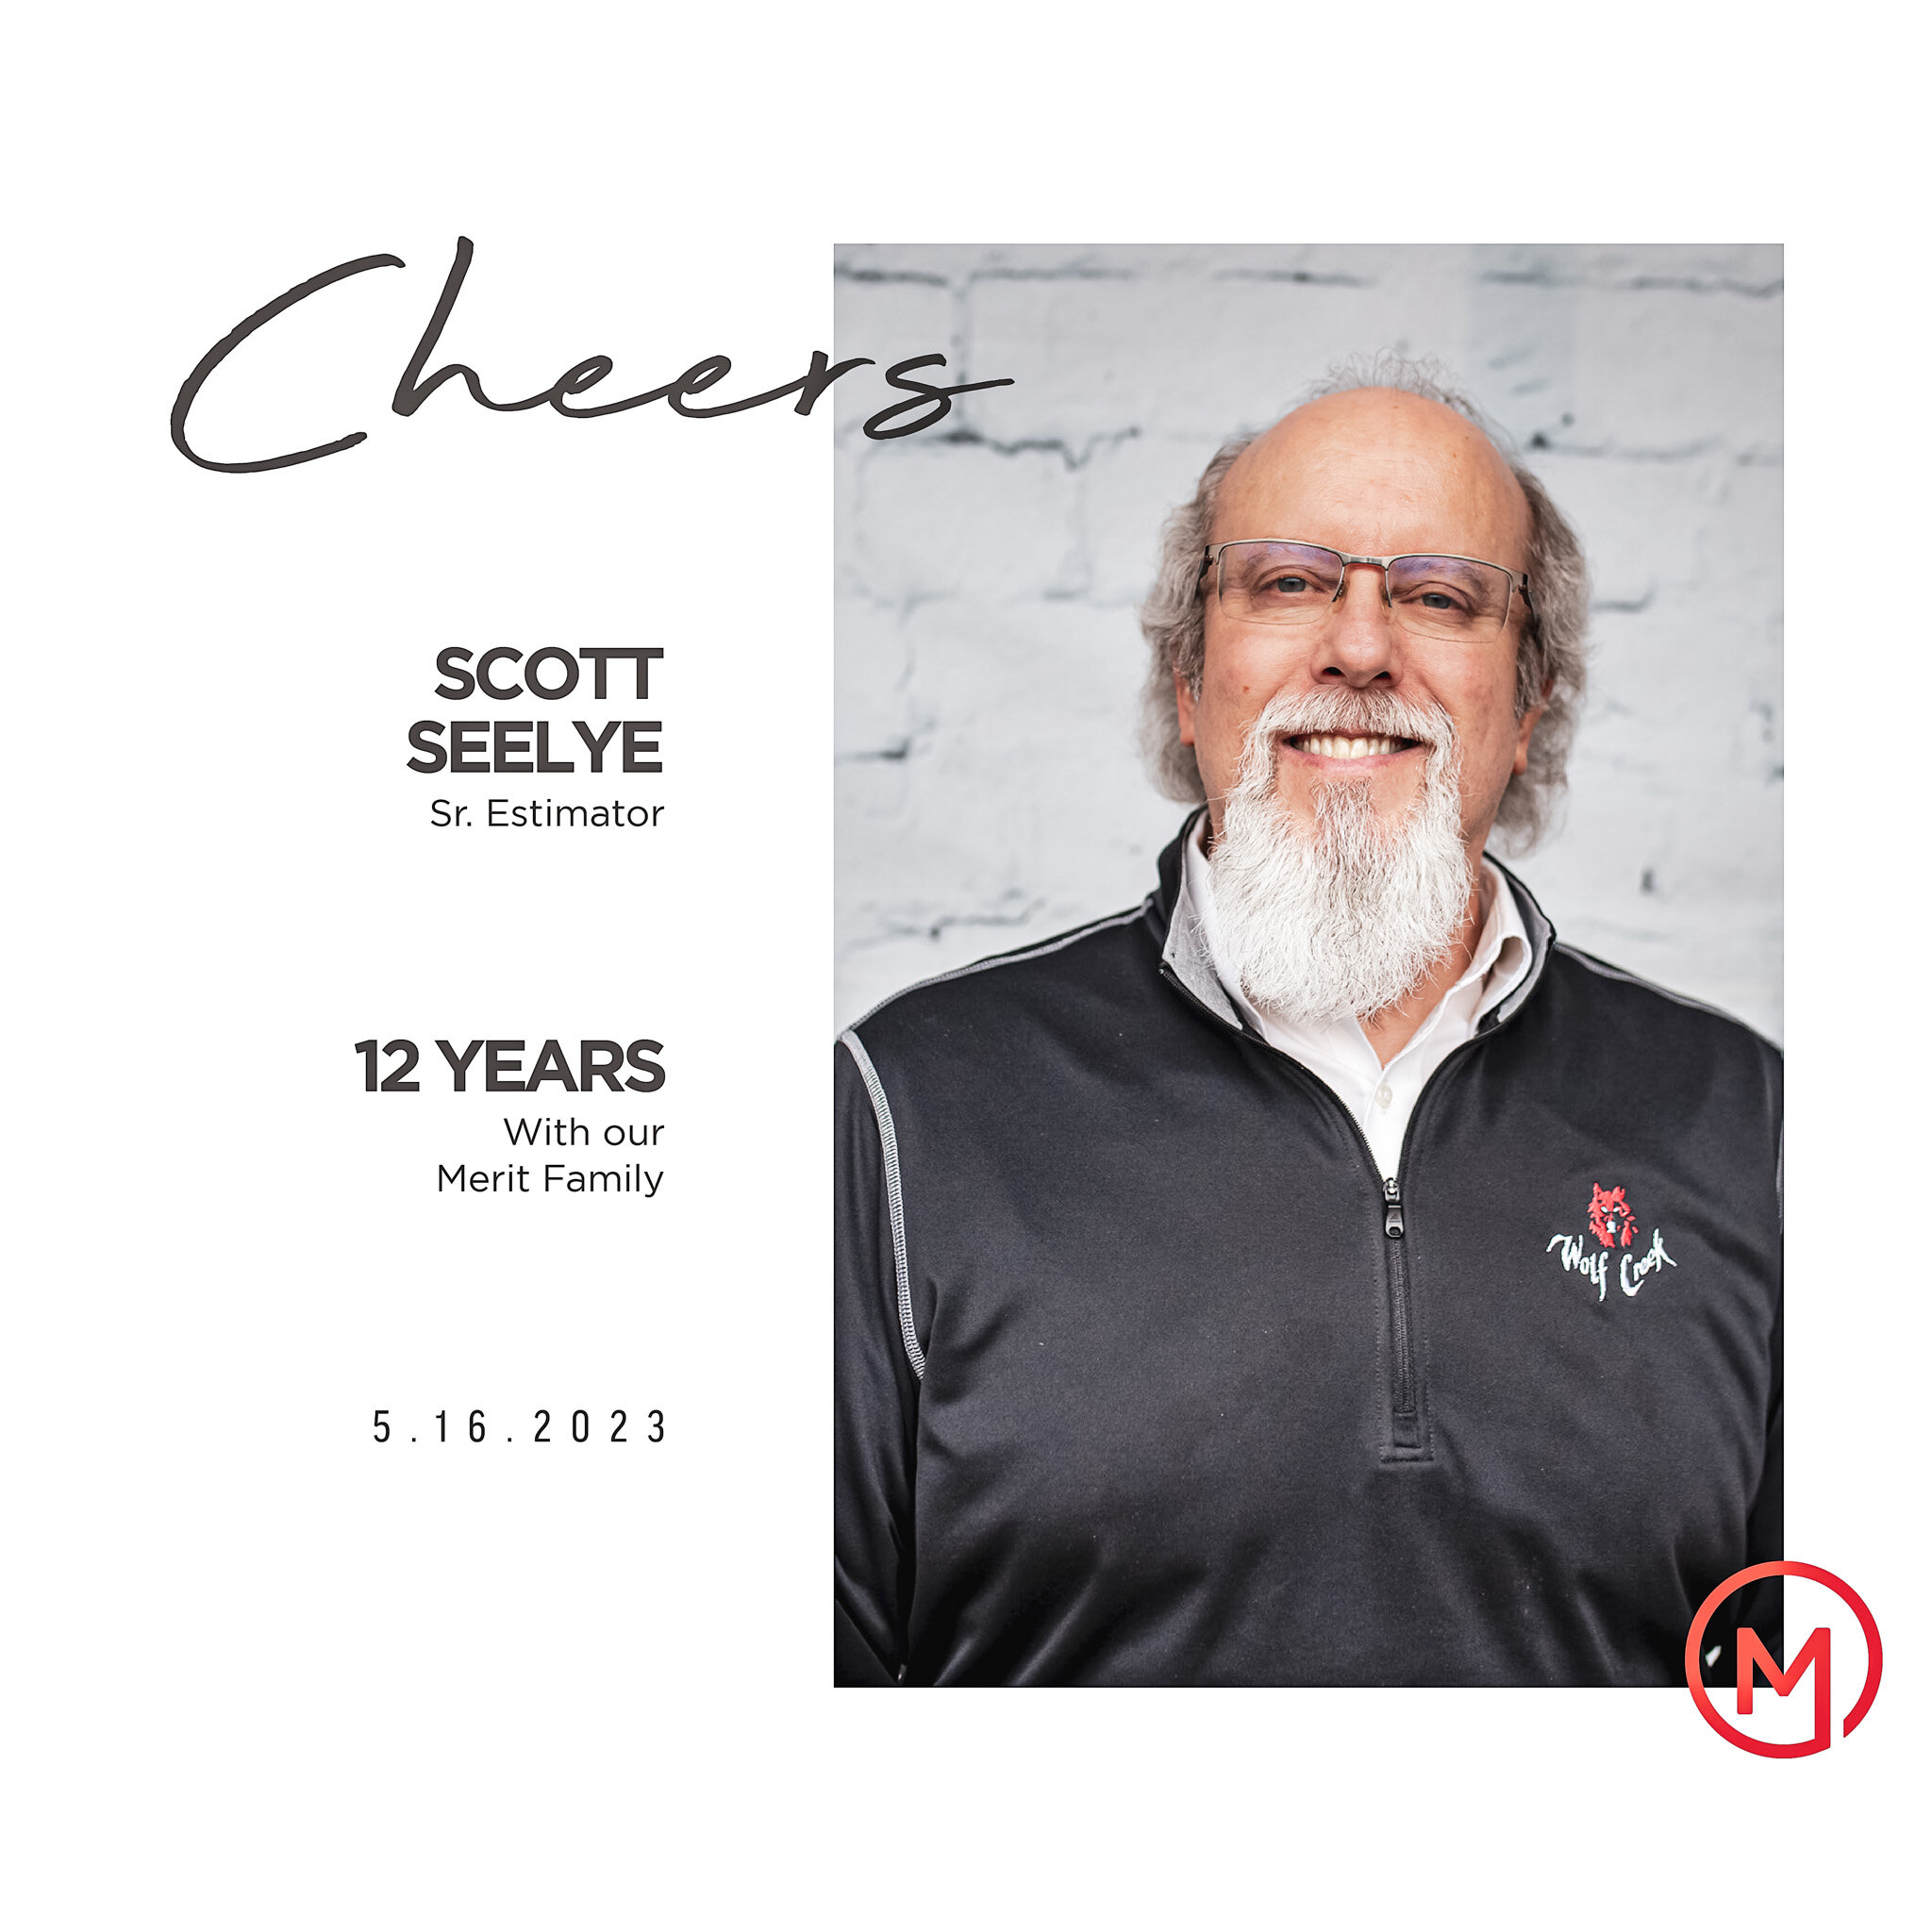 Today marks 12 years of Scott Seelye at Merit, and we could not be more grateful! Scott is generous with his knowledge and prioritizes Merit and his team, always. He's the kind of guy you want in your corner, on your project, at your work, and in you